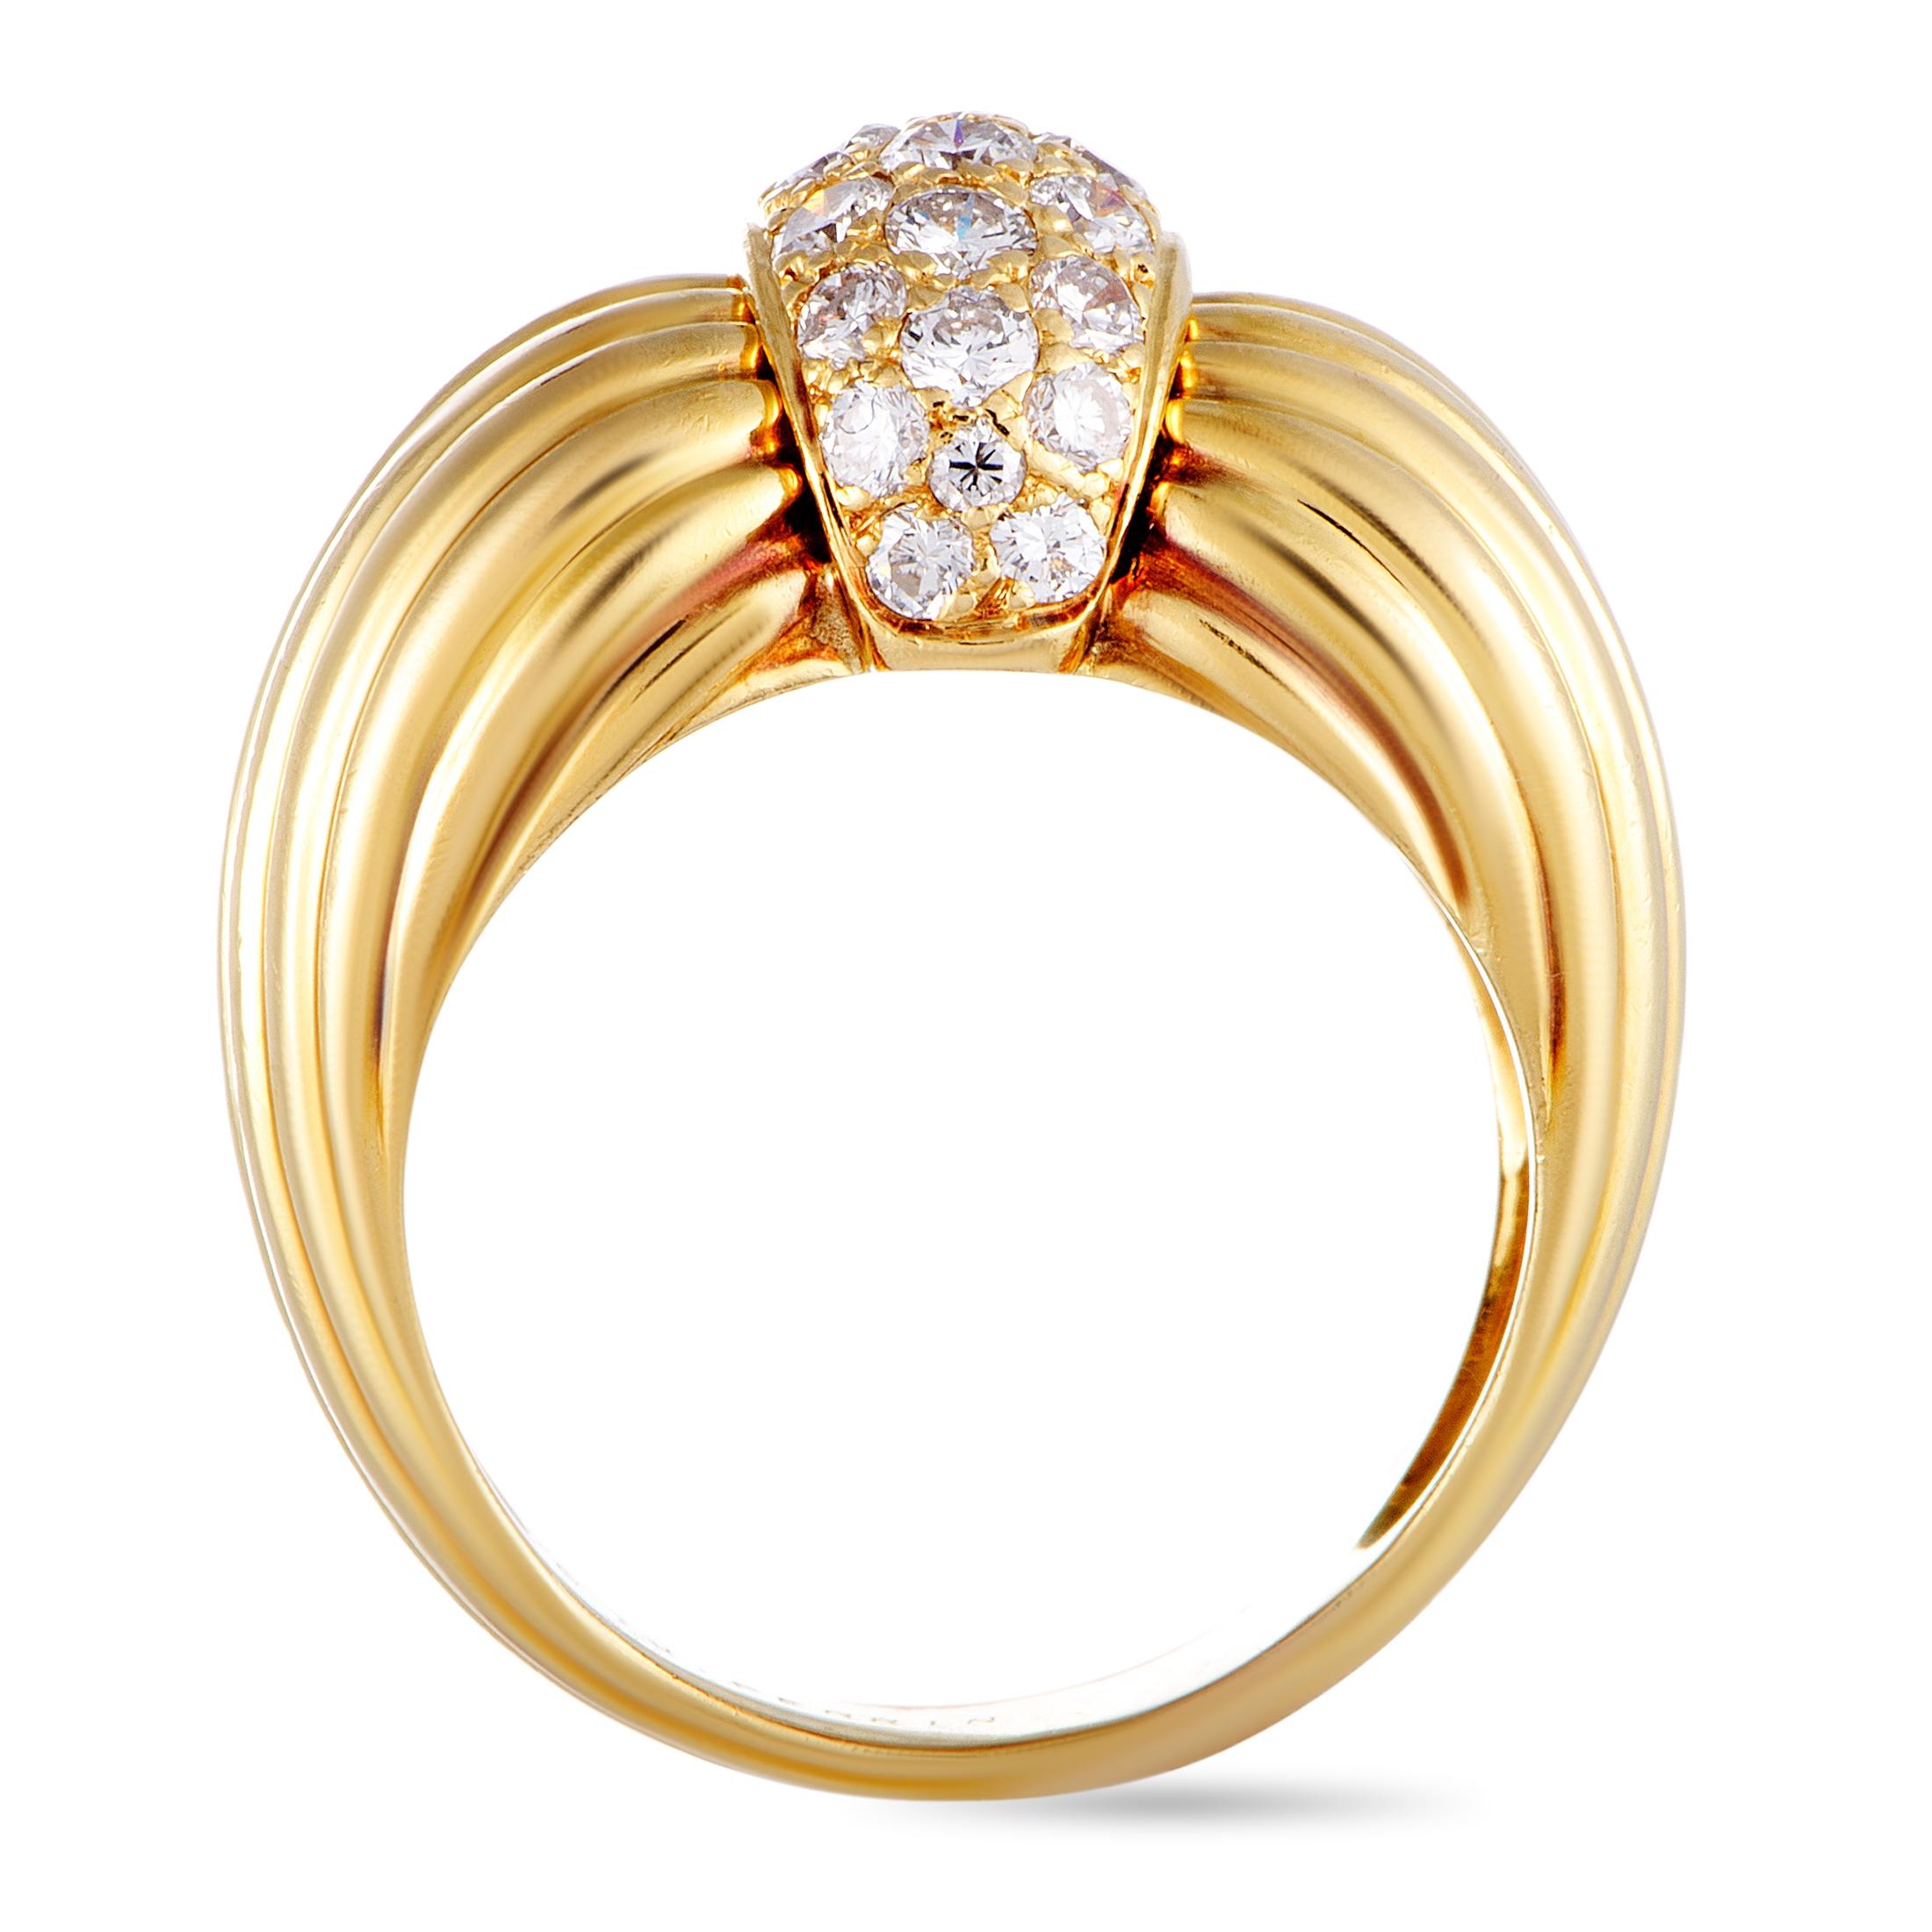 This O.J. Perrin ring is made out of 18K yellow gold and diamonds and weighs 11.7 grams. The diamonds feature grade F color and VS1 clarity and amount to 0.65 carats. The ring boasts band thickness of 6 mm and top height of 7 mm, while top